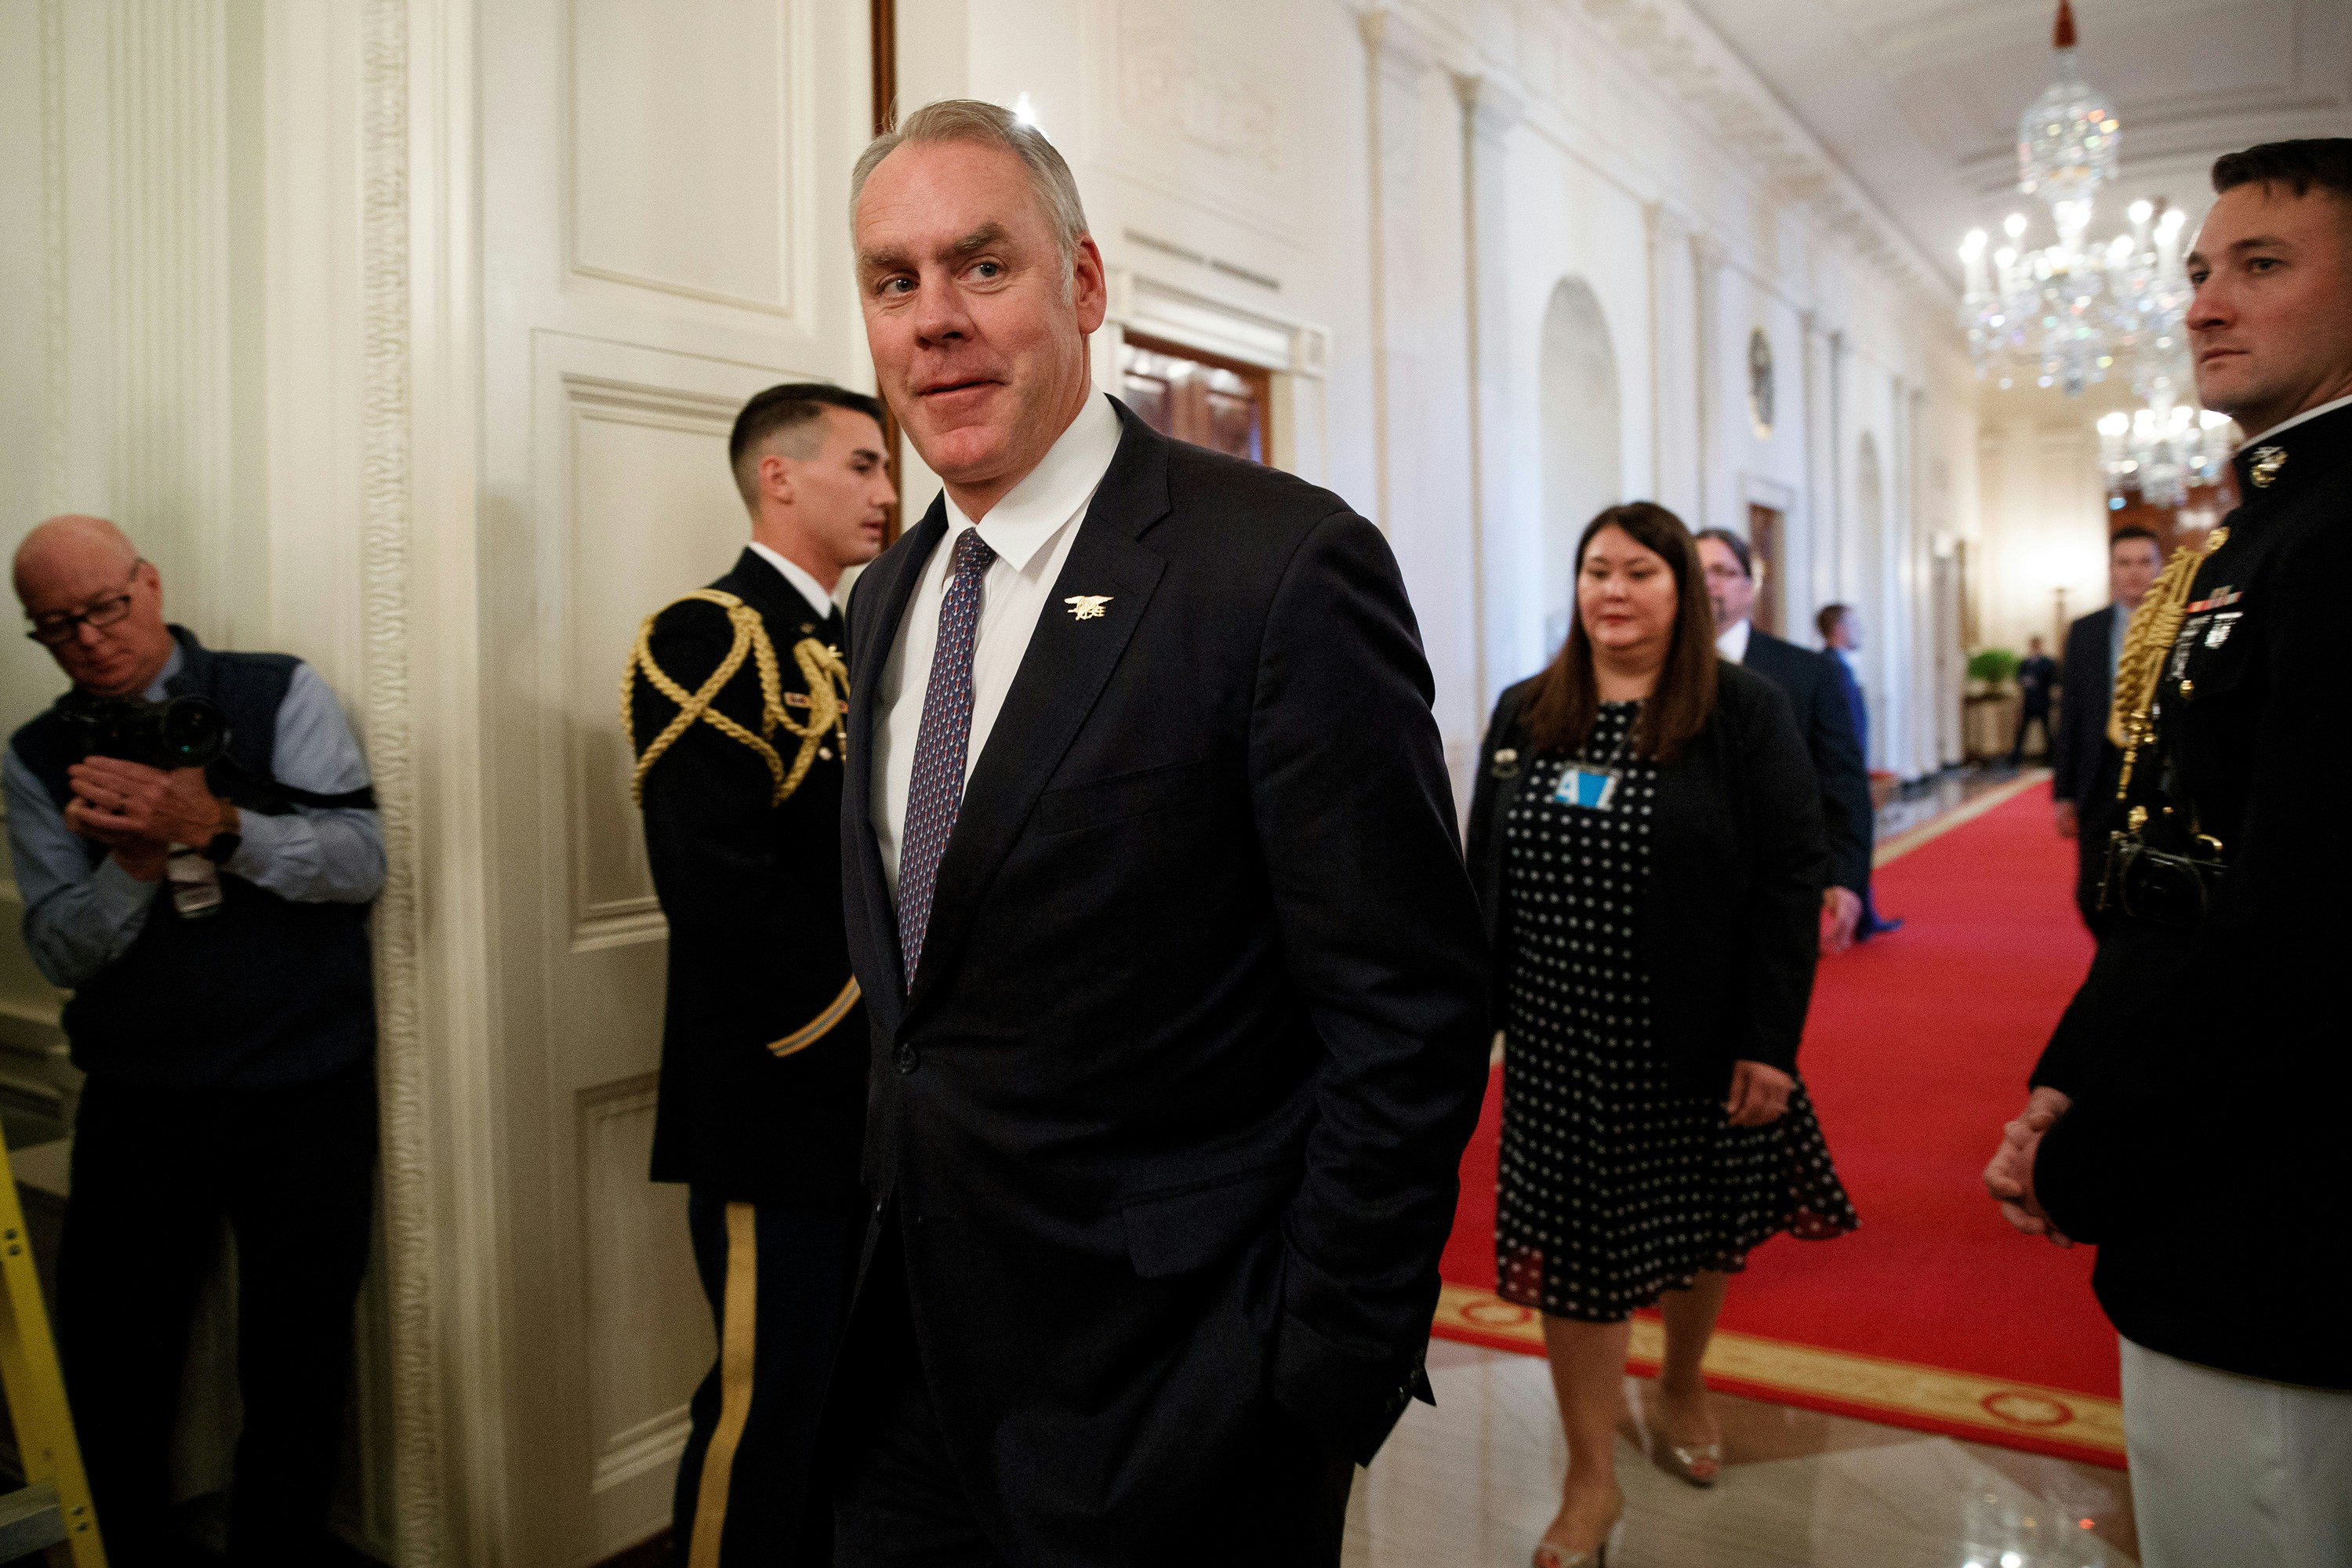 FILE - In this Oct. 24, 2018 file photo, Secretary of the Interior Ryan Zinke arrives for an event with President Donald Trump on the opioid crisis in the East Room of the White House in Washington. Zinke says he’s “100 percent confident” no wrongdoing will be found in pending ethics investigations that have stirred speculation he could get ousted from Trump’s cabinet. (AP Photo/Evan Vucci, File)